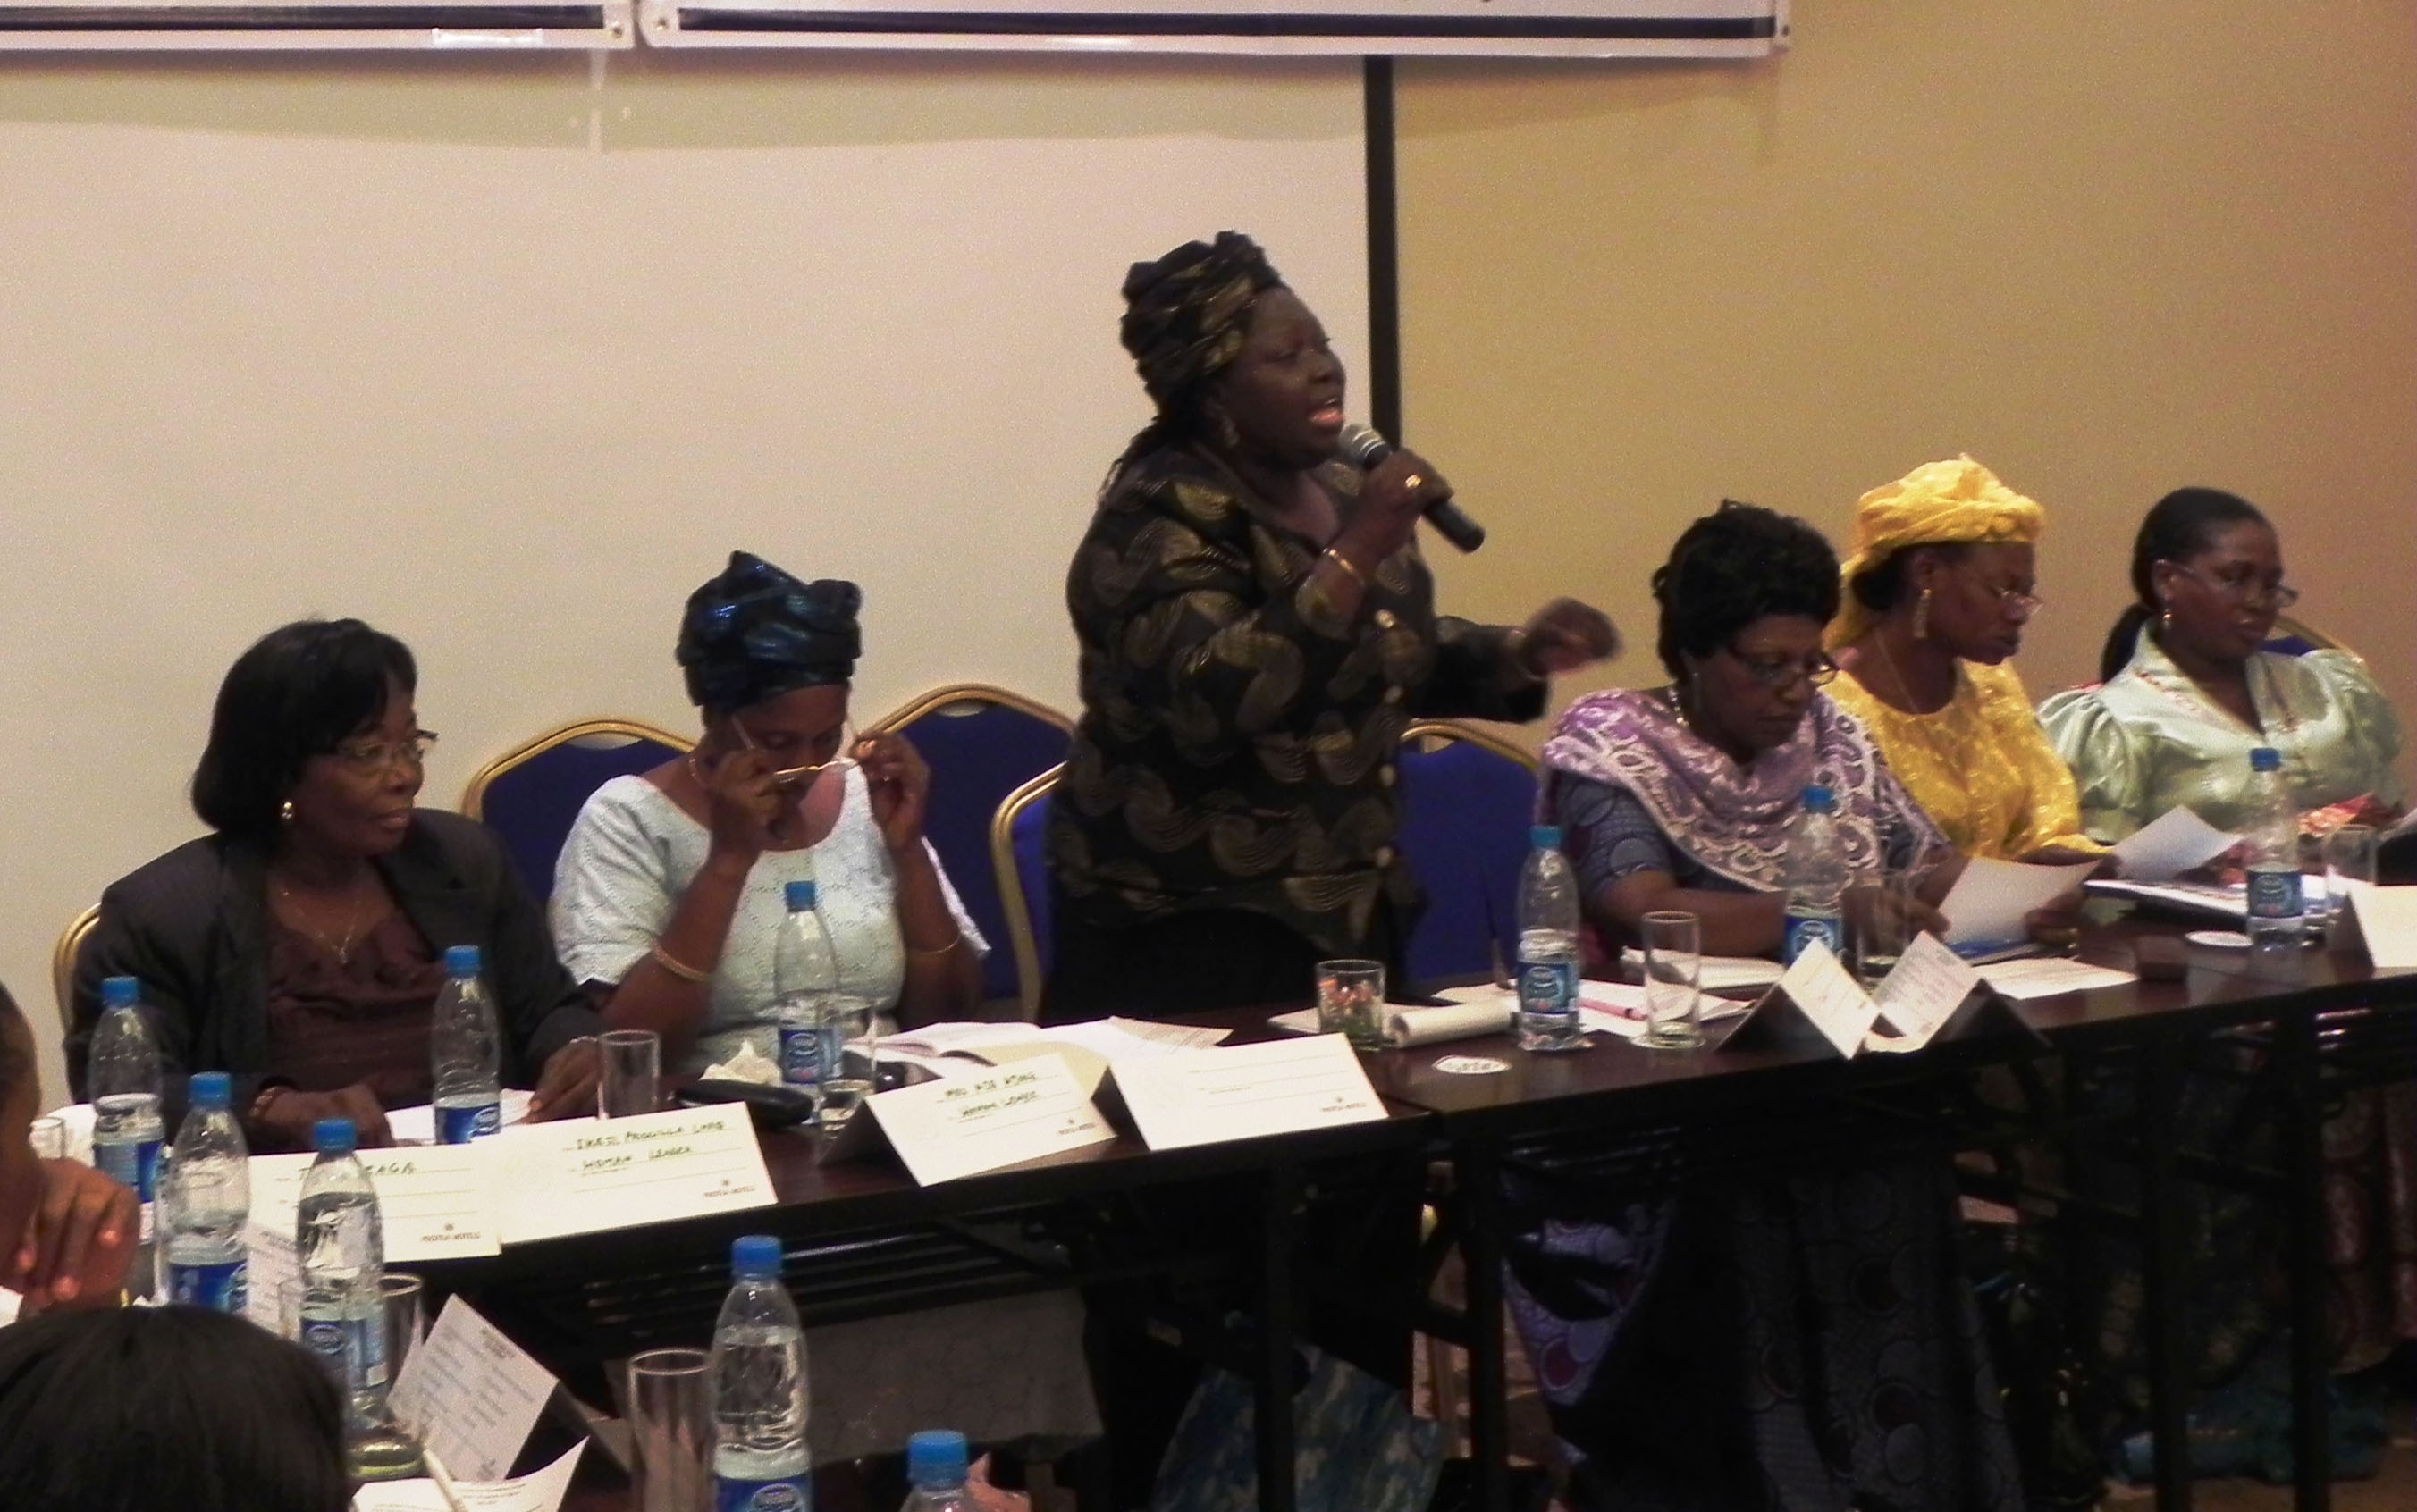 Bisi Olateru (center), of the Women’s Consortium of Nigeria and possible candidate for election in 2011, speaks to workshop participants.